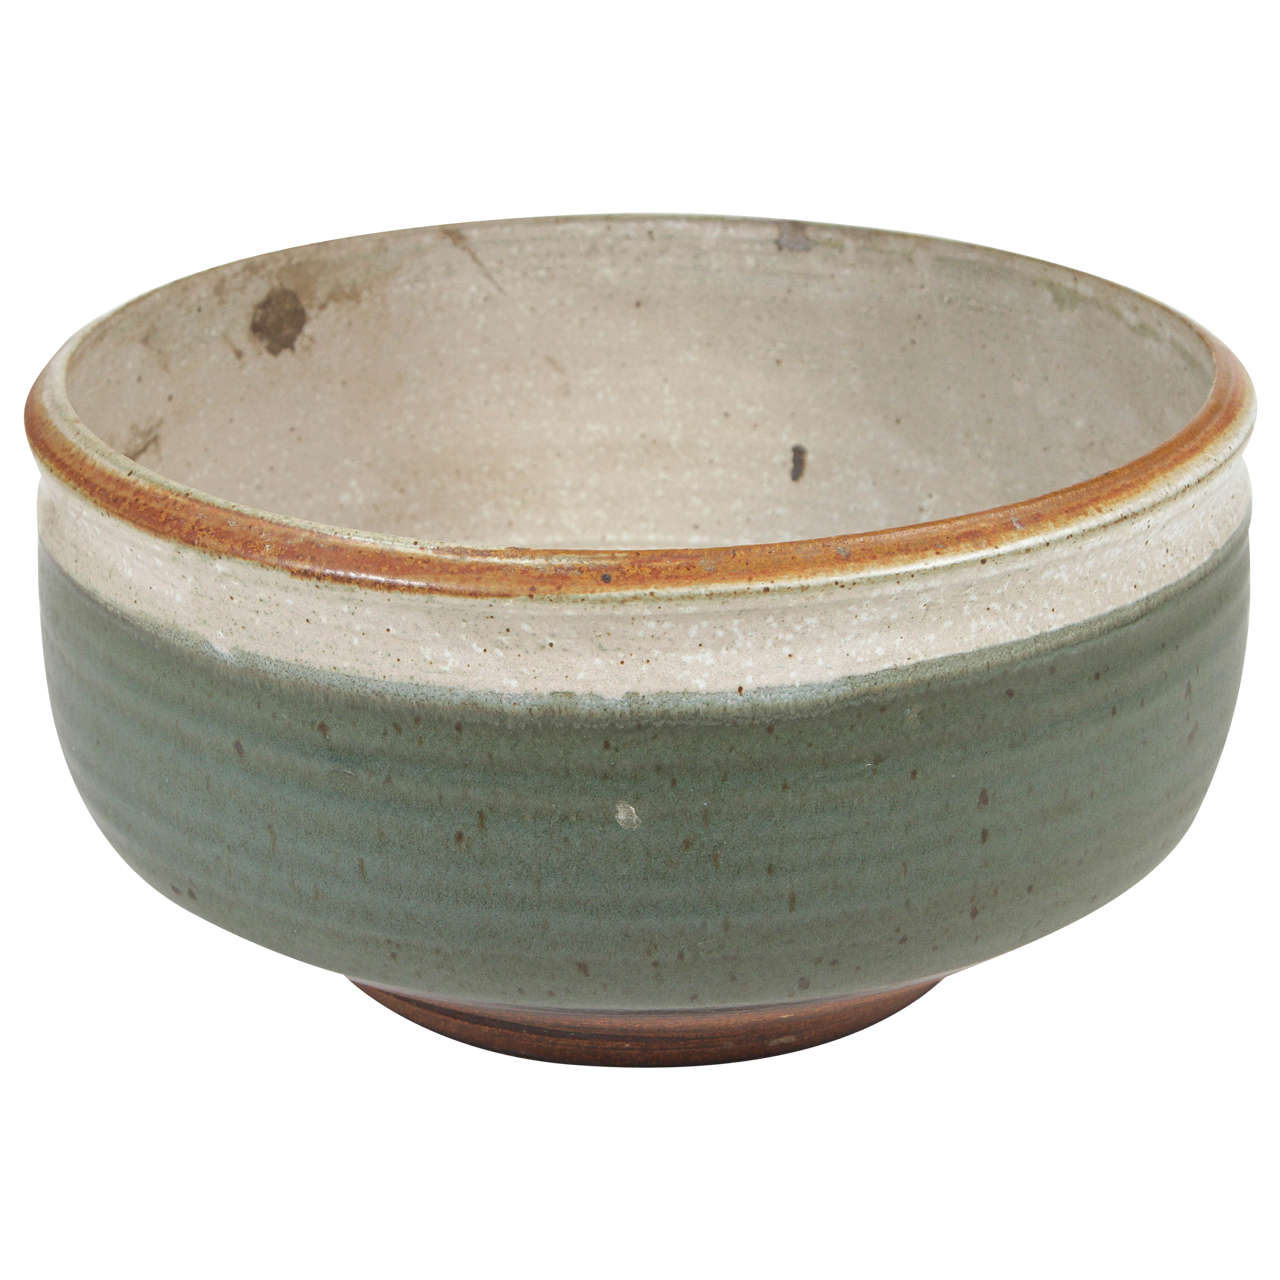 Hand Thrown Planter by Raul Coronel for Architectural Pottery